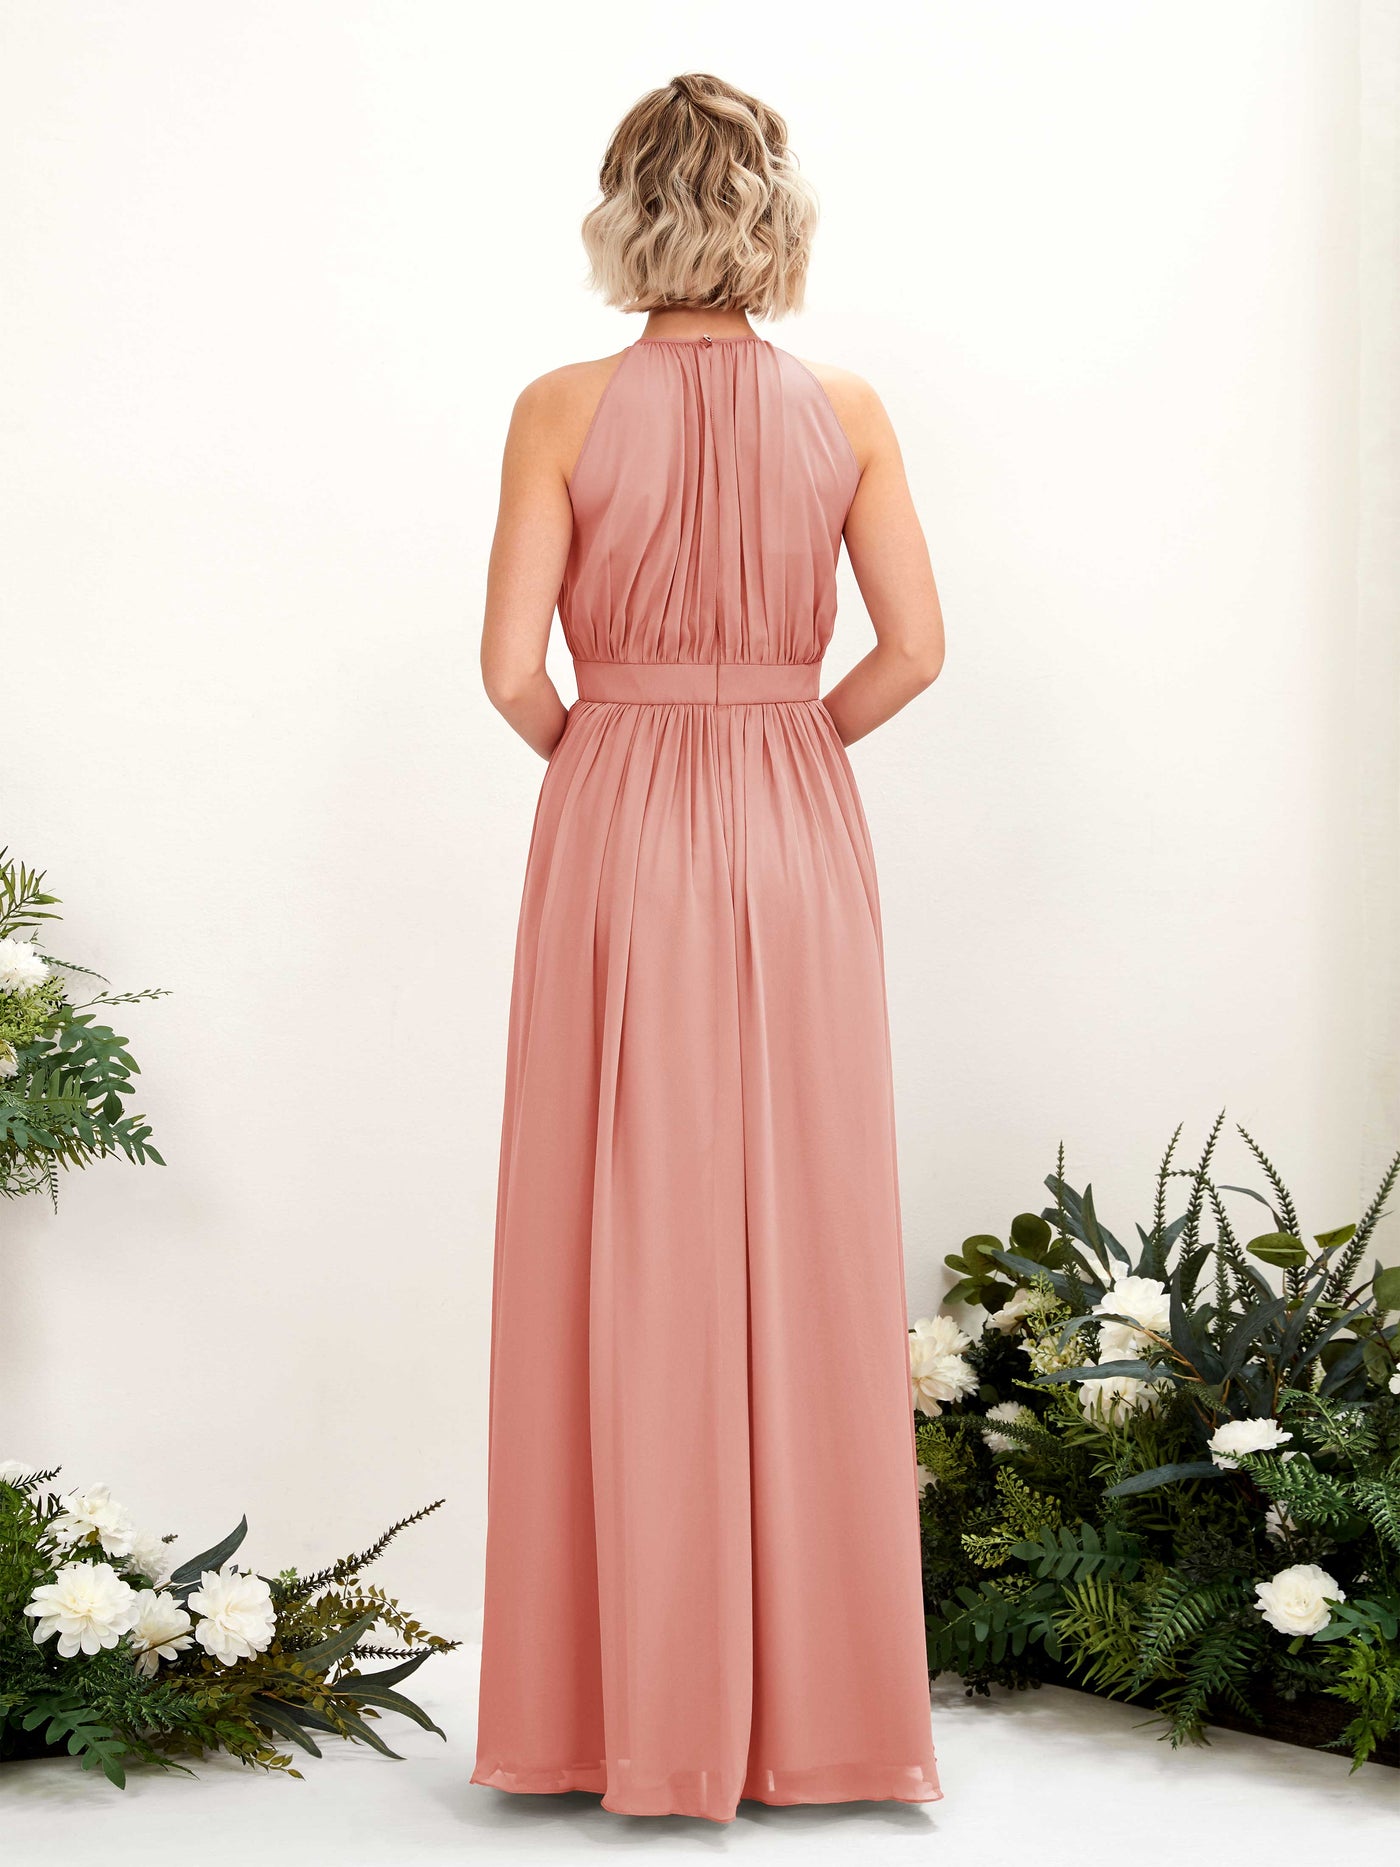 Champagne Rose Bridesmaid Dresses Bridesmaid Dress A-line Chiffon Halter Full Length Sleeveless Wedding Party Dress (81223106)#color_champagne-rose